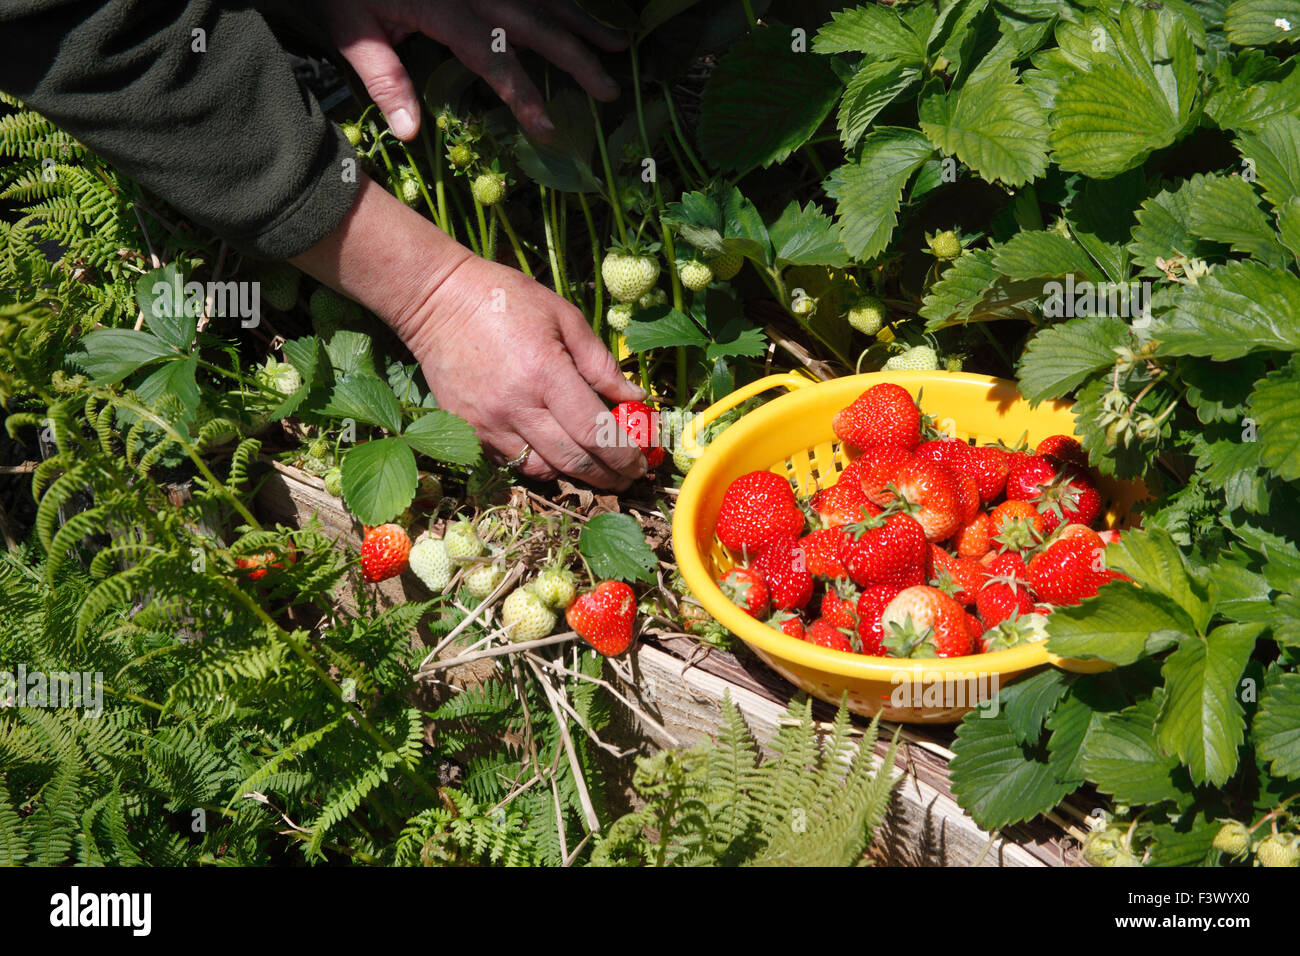 Picking strawberries growing in raised bed Stock Photo